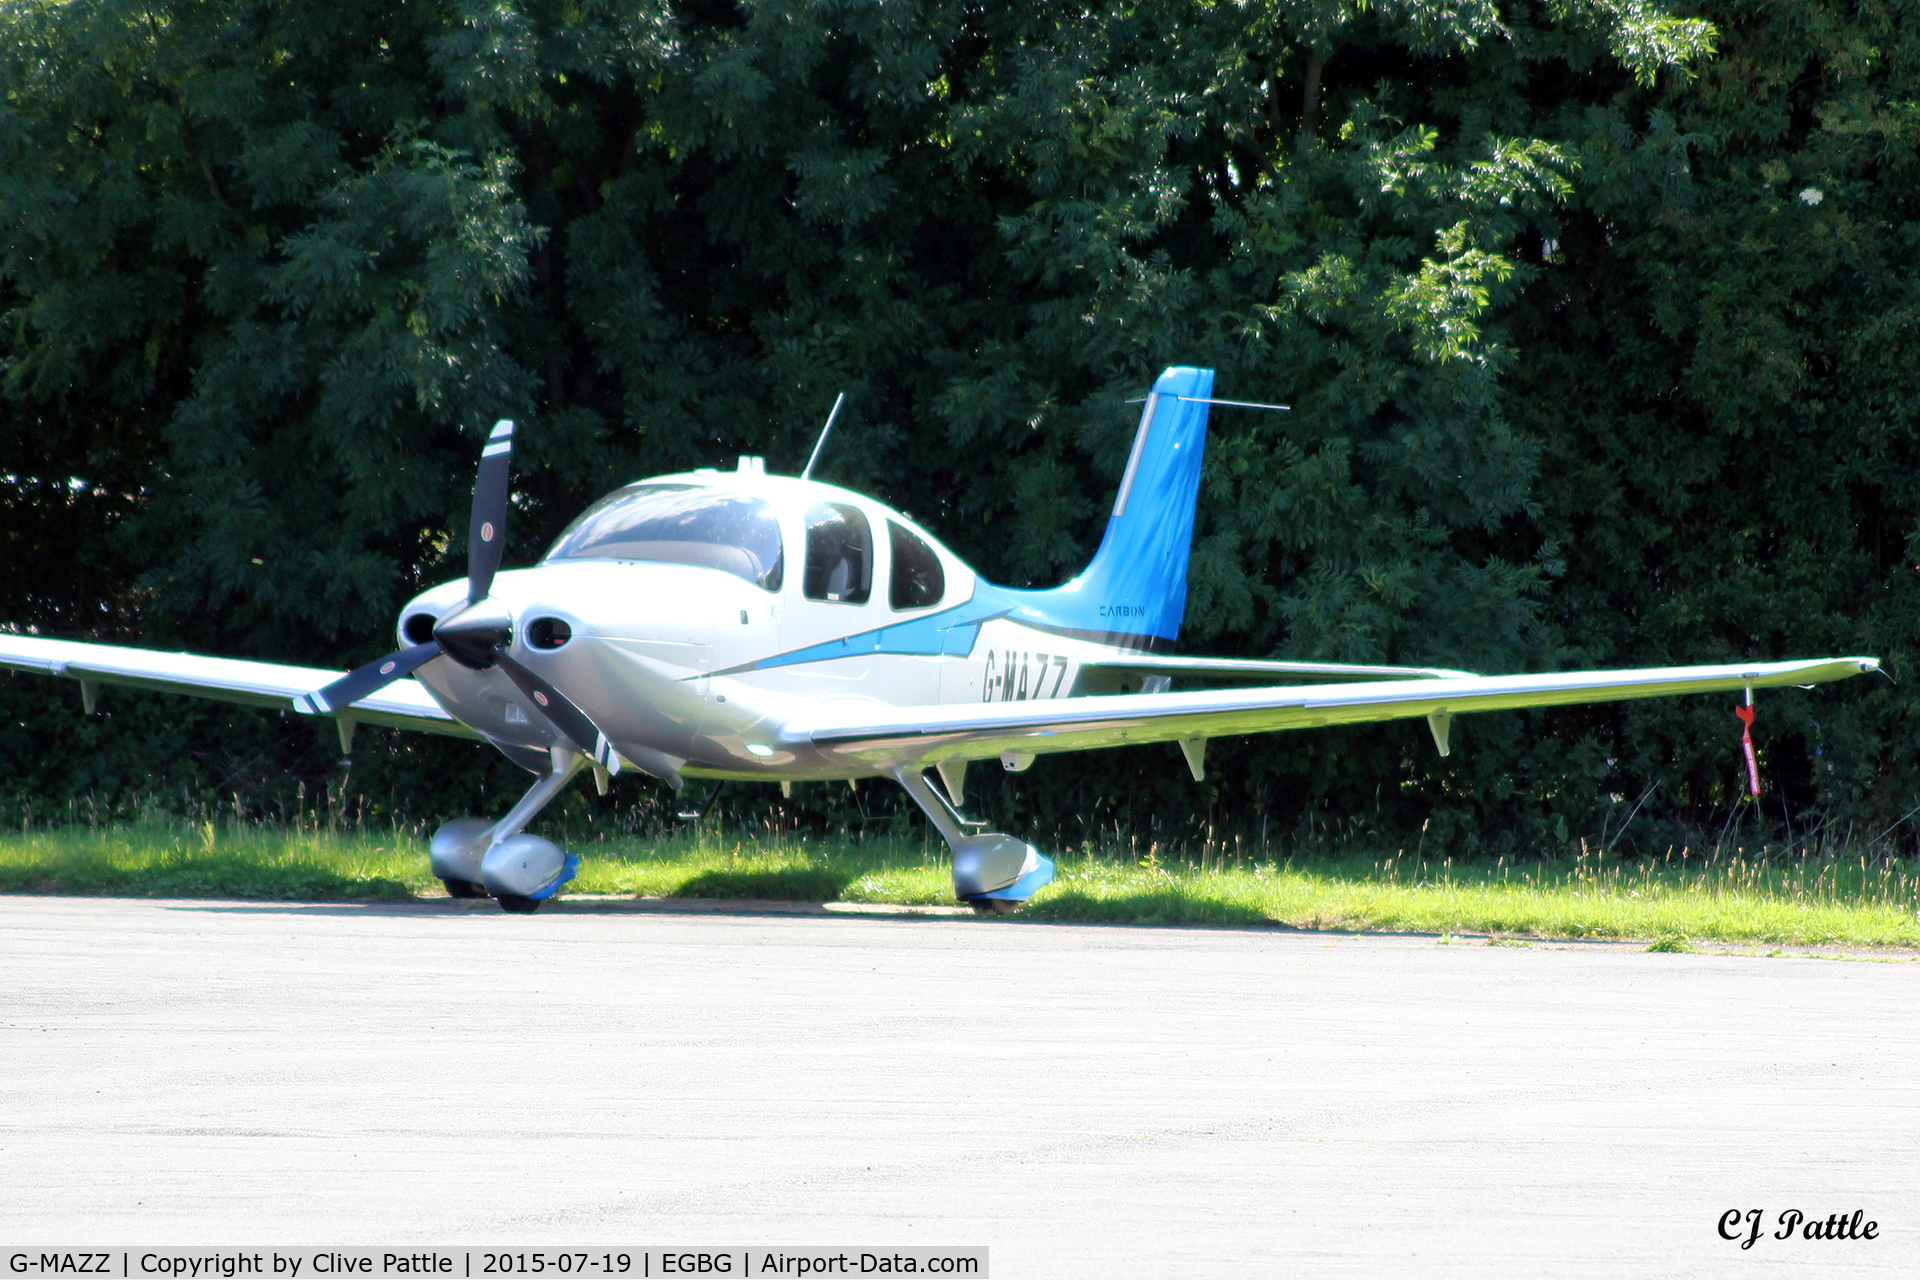 G-MAZZ, 2014 Cirrus SR22 C/N 4135, Parked at Leicester EGBG